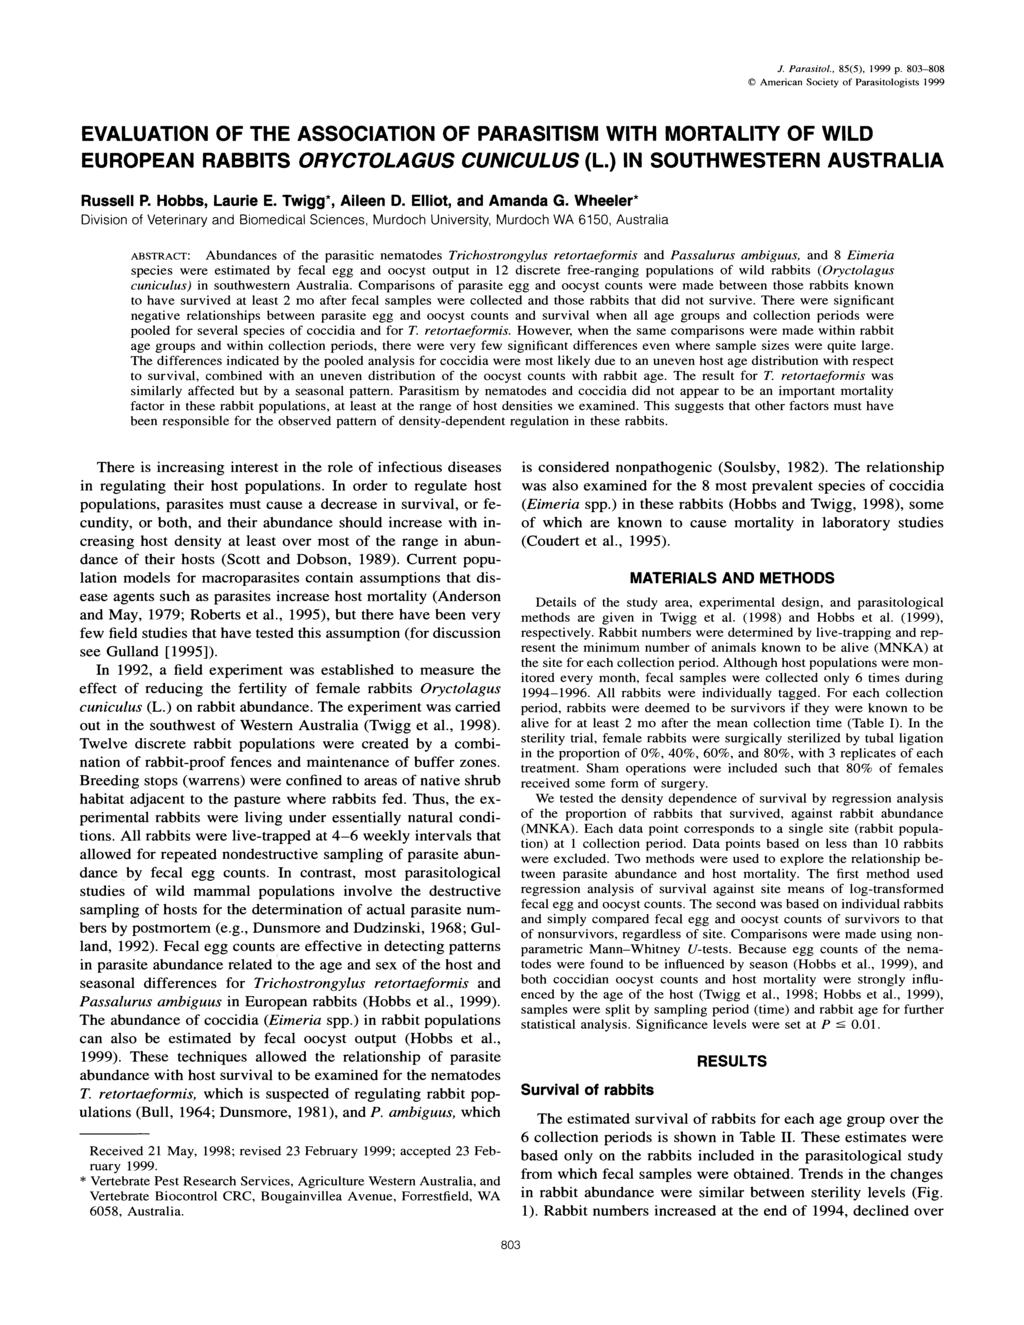 J. Parasitl., 85(5), 1999 p. 803-808 C American Sciety f Parasitlgists 1999 EVALUATION OF THE ASSOCIATION OF PARASITISM WITH MORTALITY OF WILD EUROPEAN RABBITS ORYCTOLAGUS CUNICULUS (L.